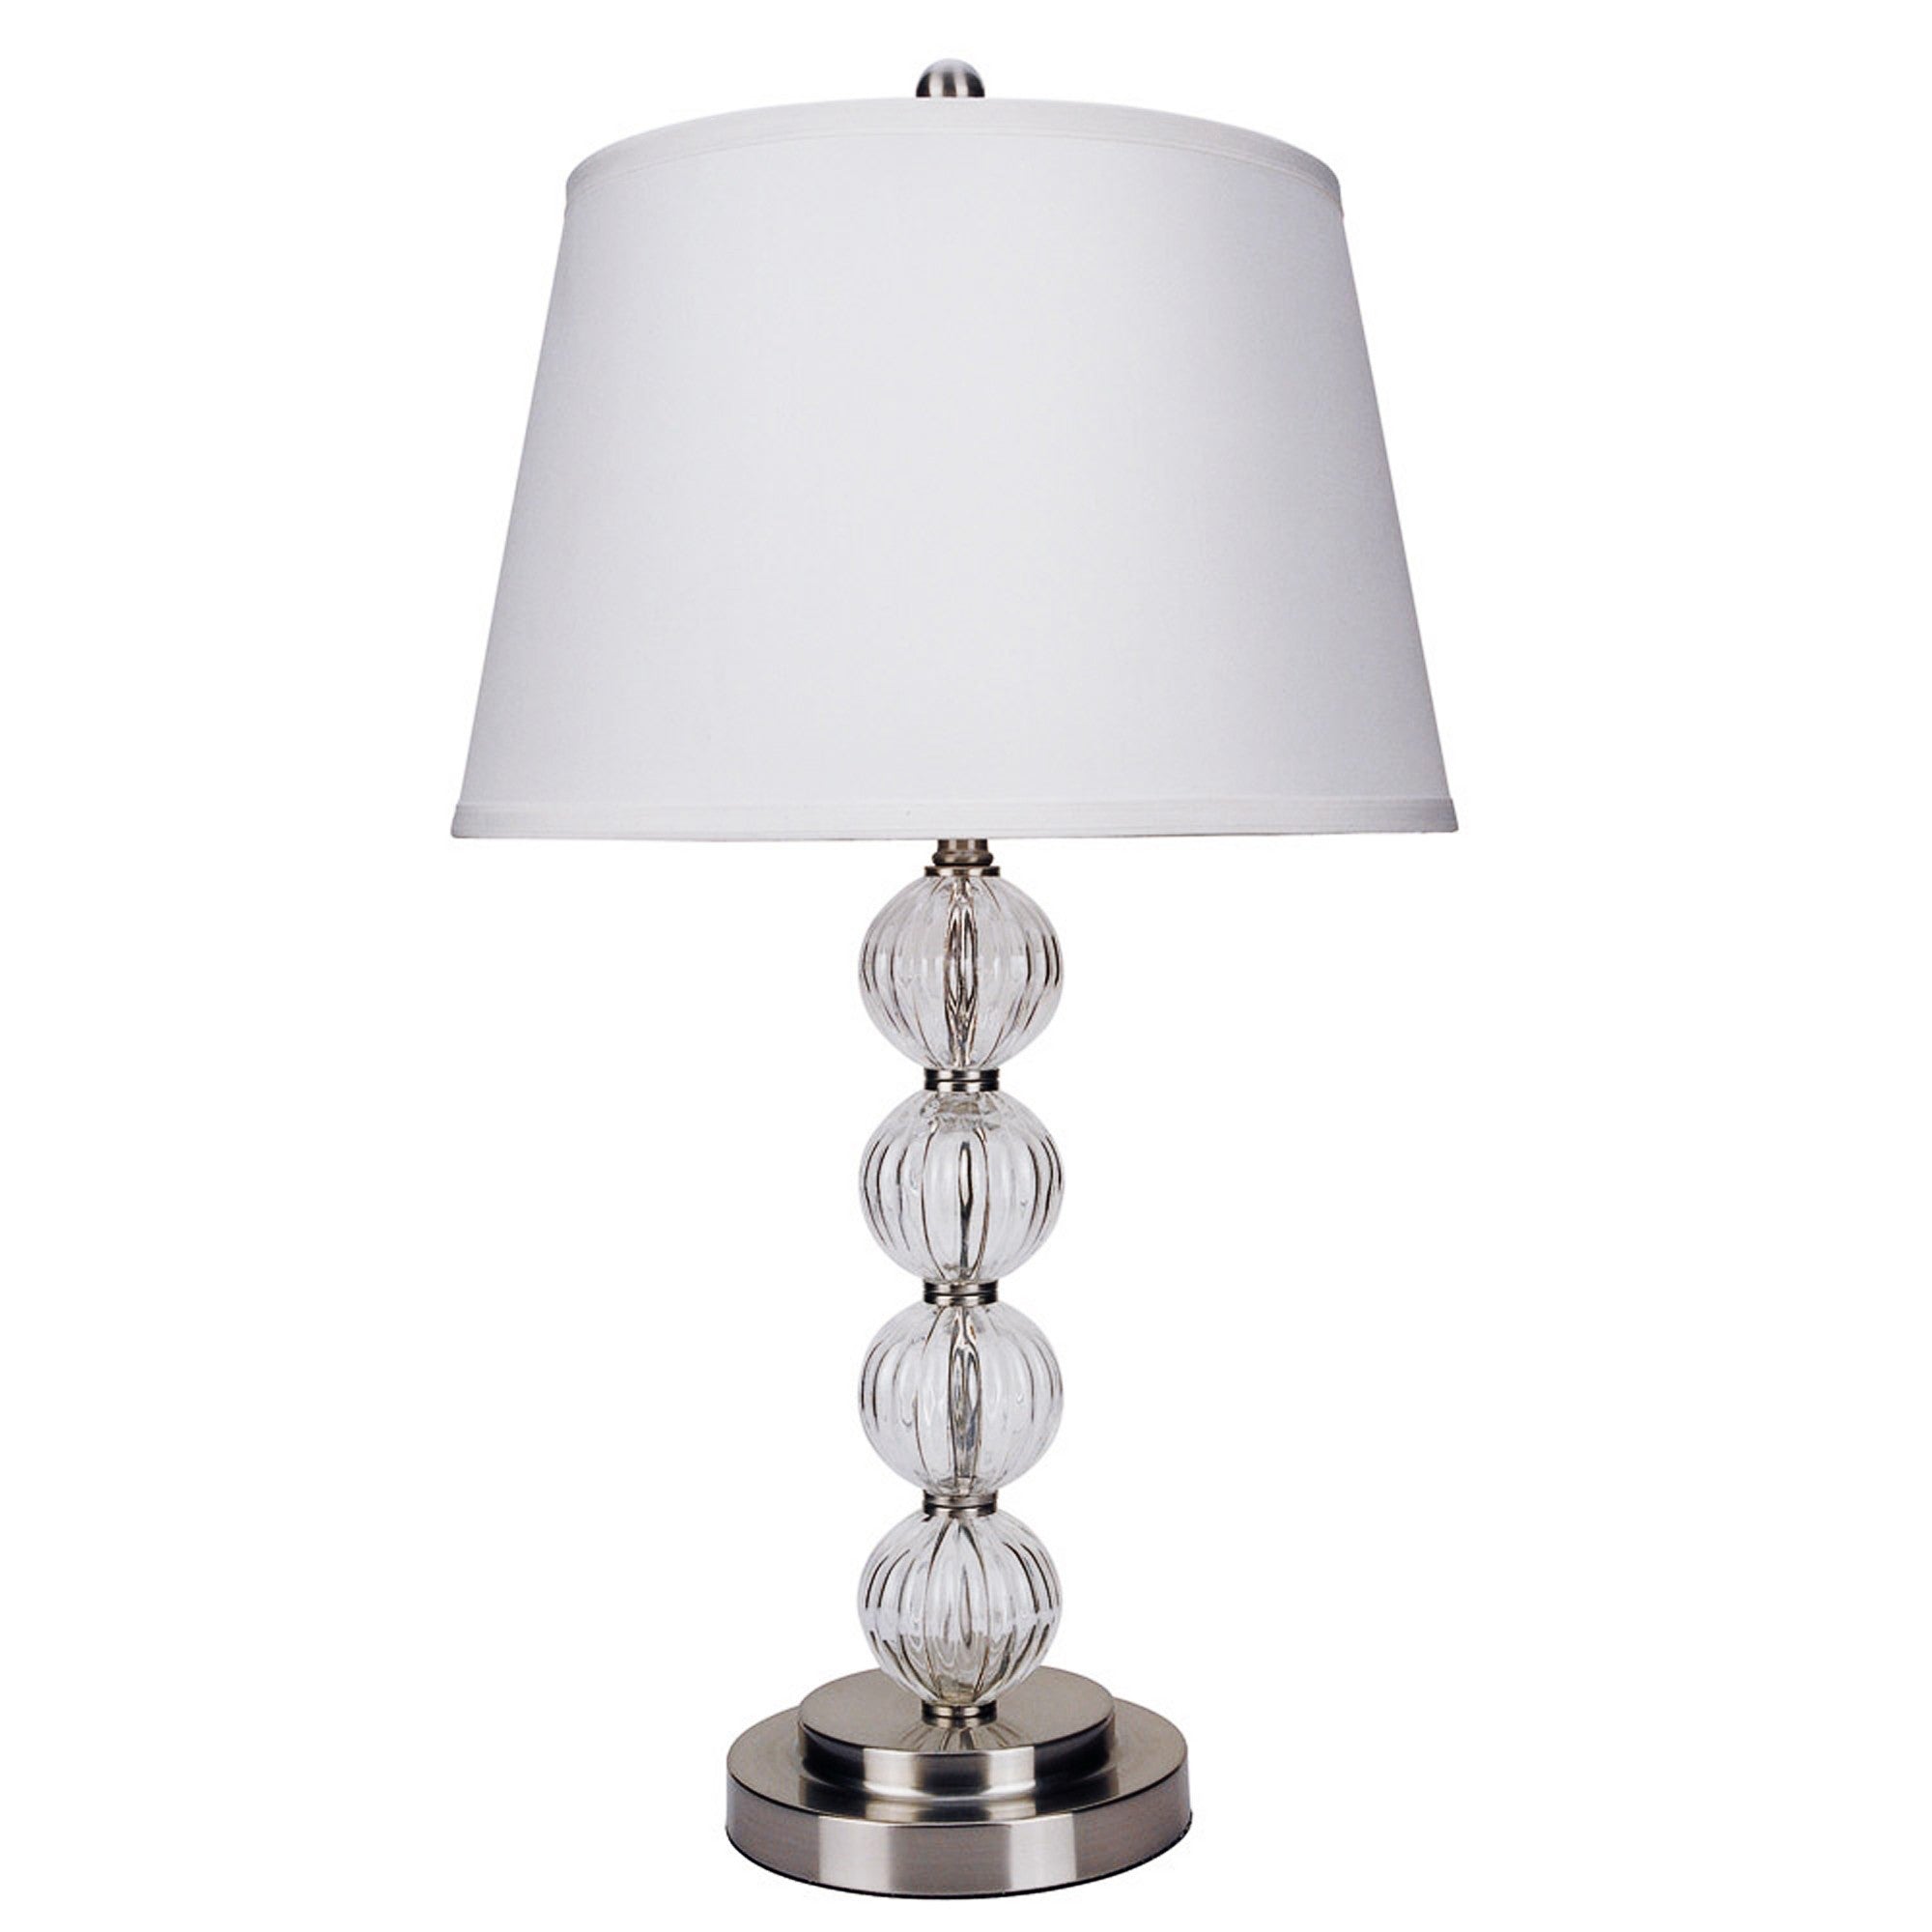 29" Silver Metal Table Lamp With White Classic Empire Shade